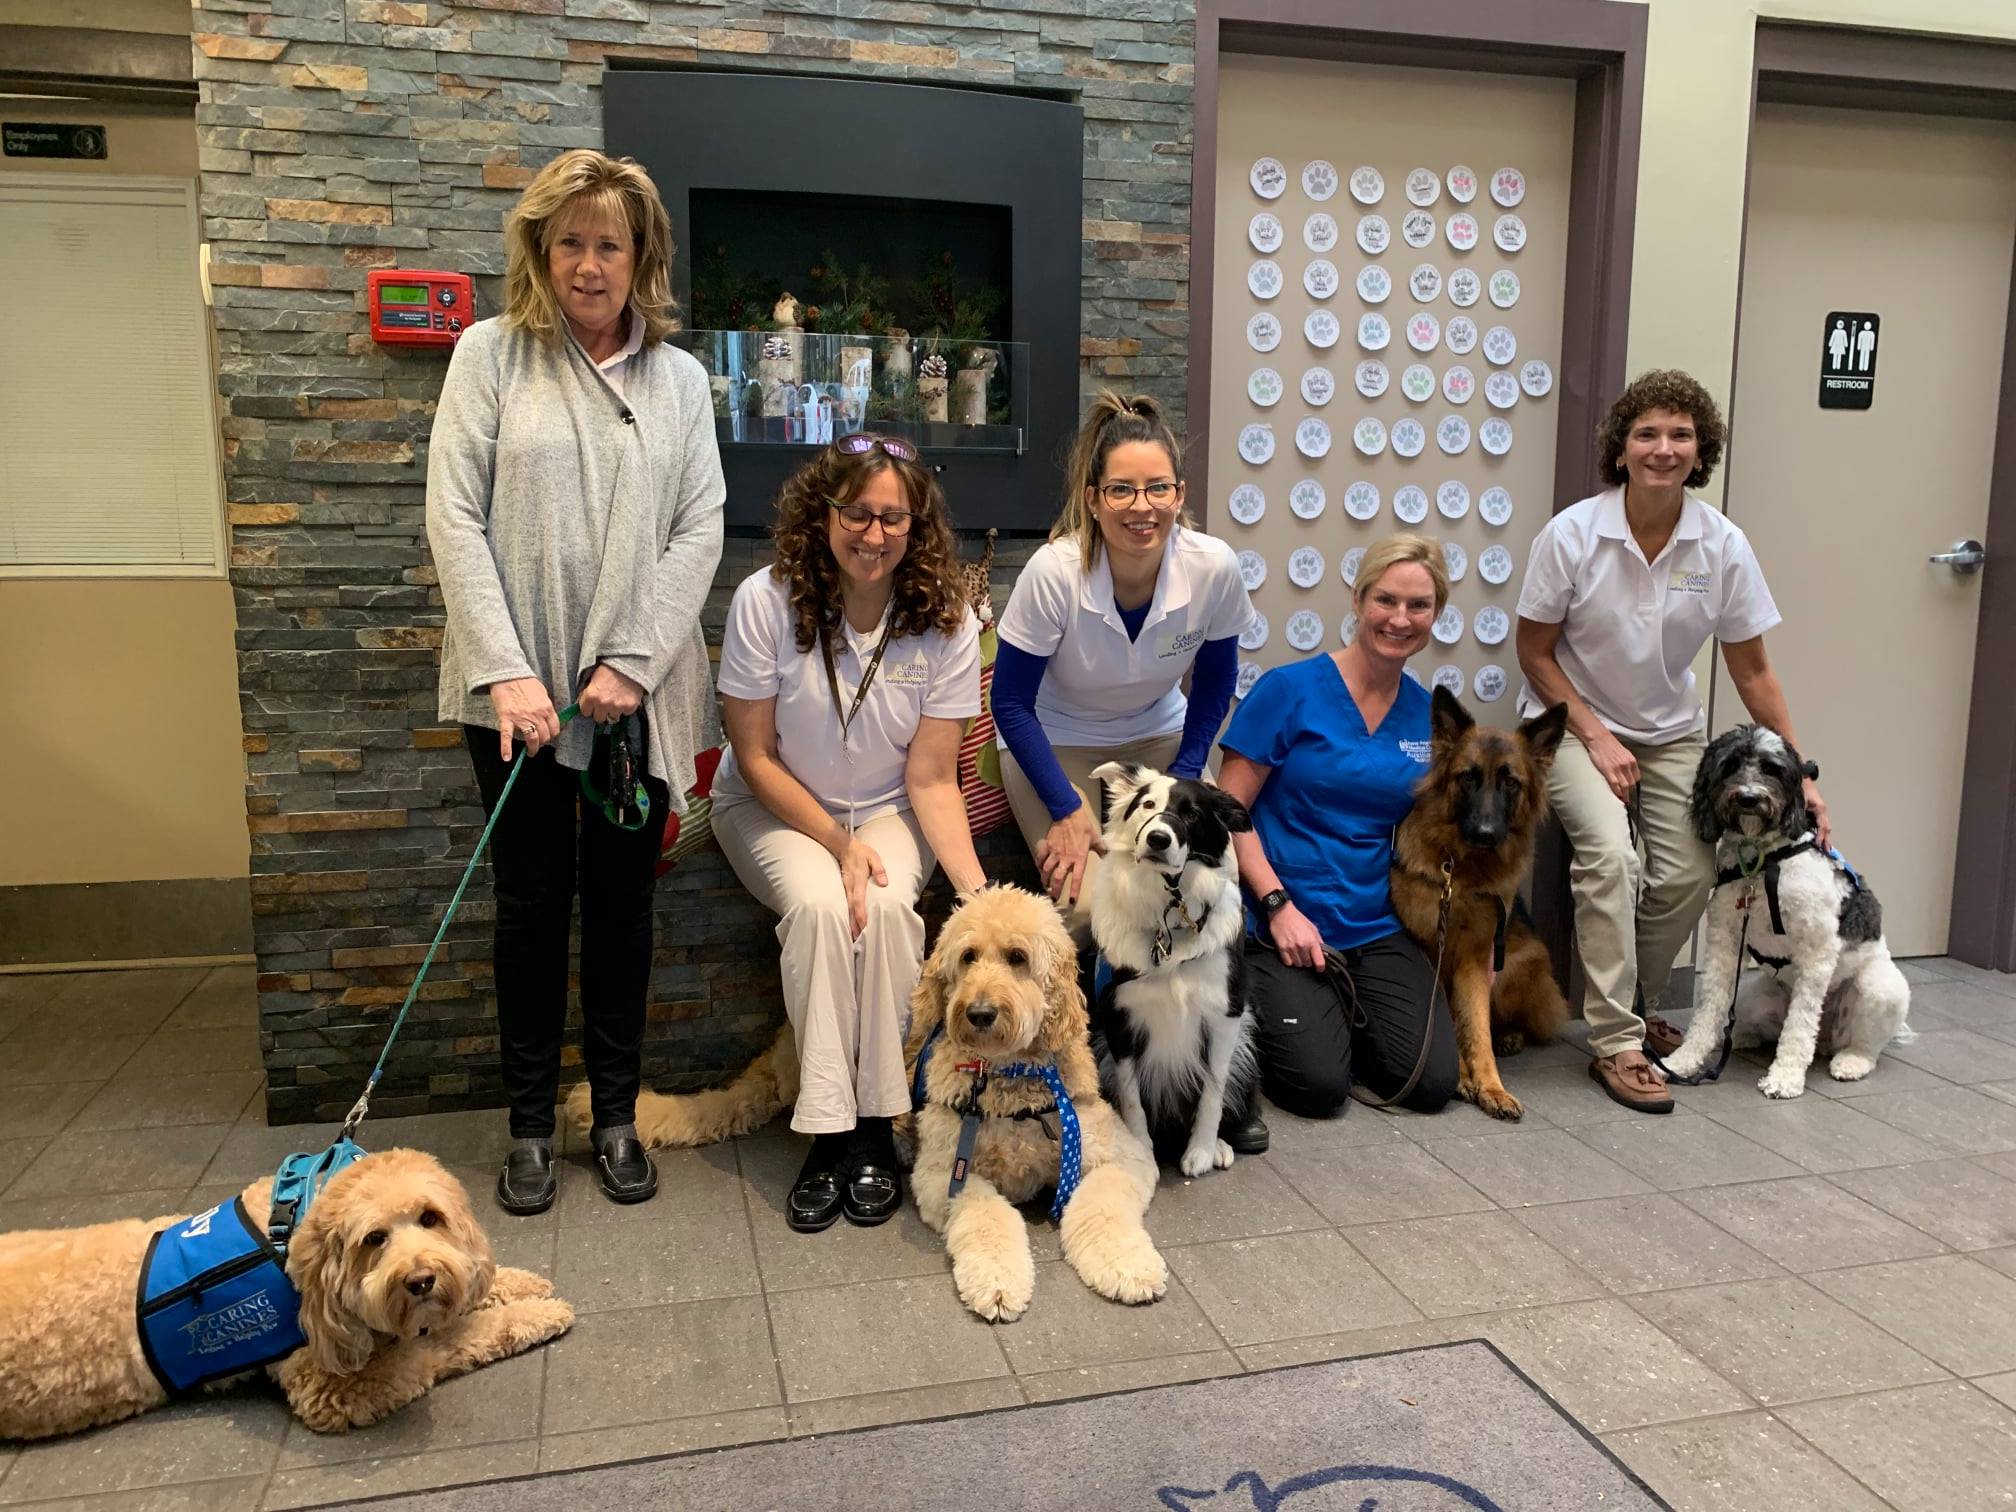 Members of the Caring Canines Pet Therapy Program pose in the lobby of Dogwood Acres Pet Retreat at one of their two locations in Maryland. Caring Canines has provided dogs for juveniles in court since the pilot program began several years ago. File photo courtesy of Caring Canines Pet Therapy Program.